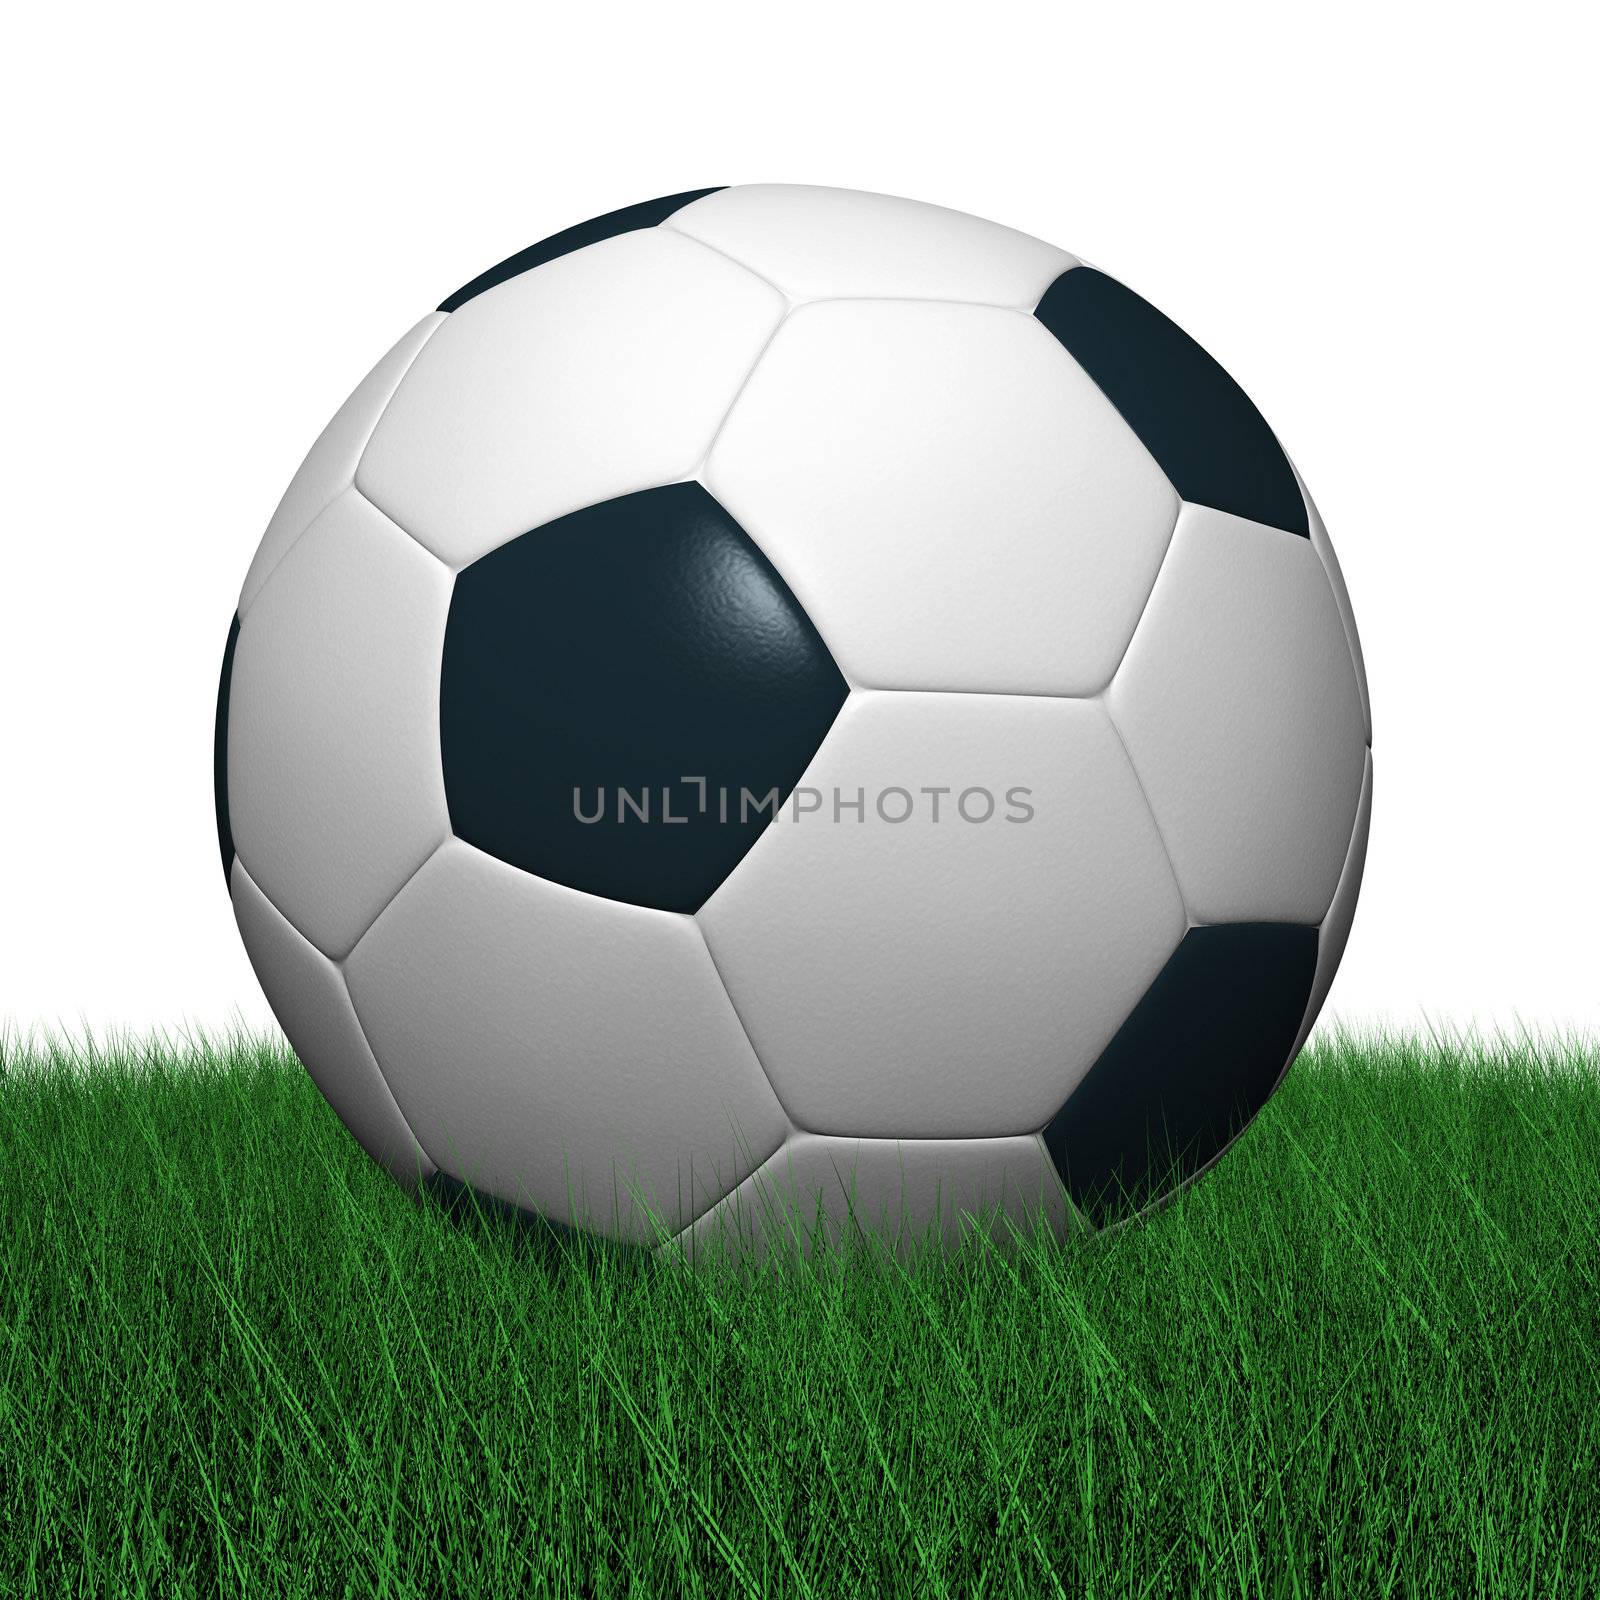 Soccer ball Photorealistic 3D rendering.